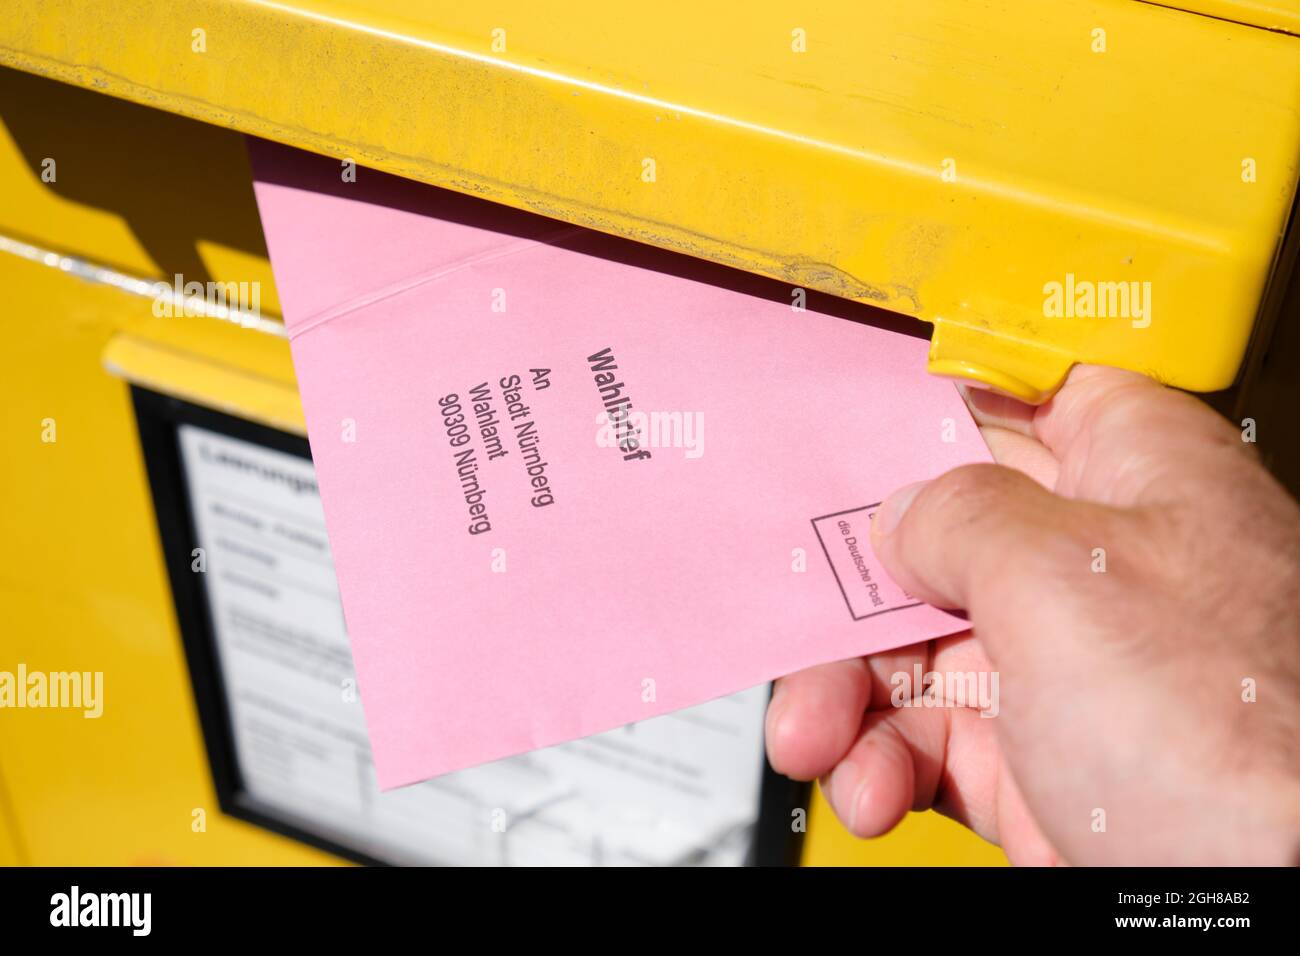 Nuremberg, Germany - September 09, 2021: A male hand inserting a Wahlbrief ( election letter ) into the mail slot of a yellow letter box for the Bunde Stock Photo